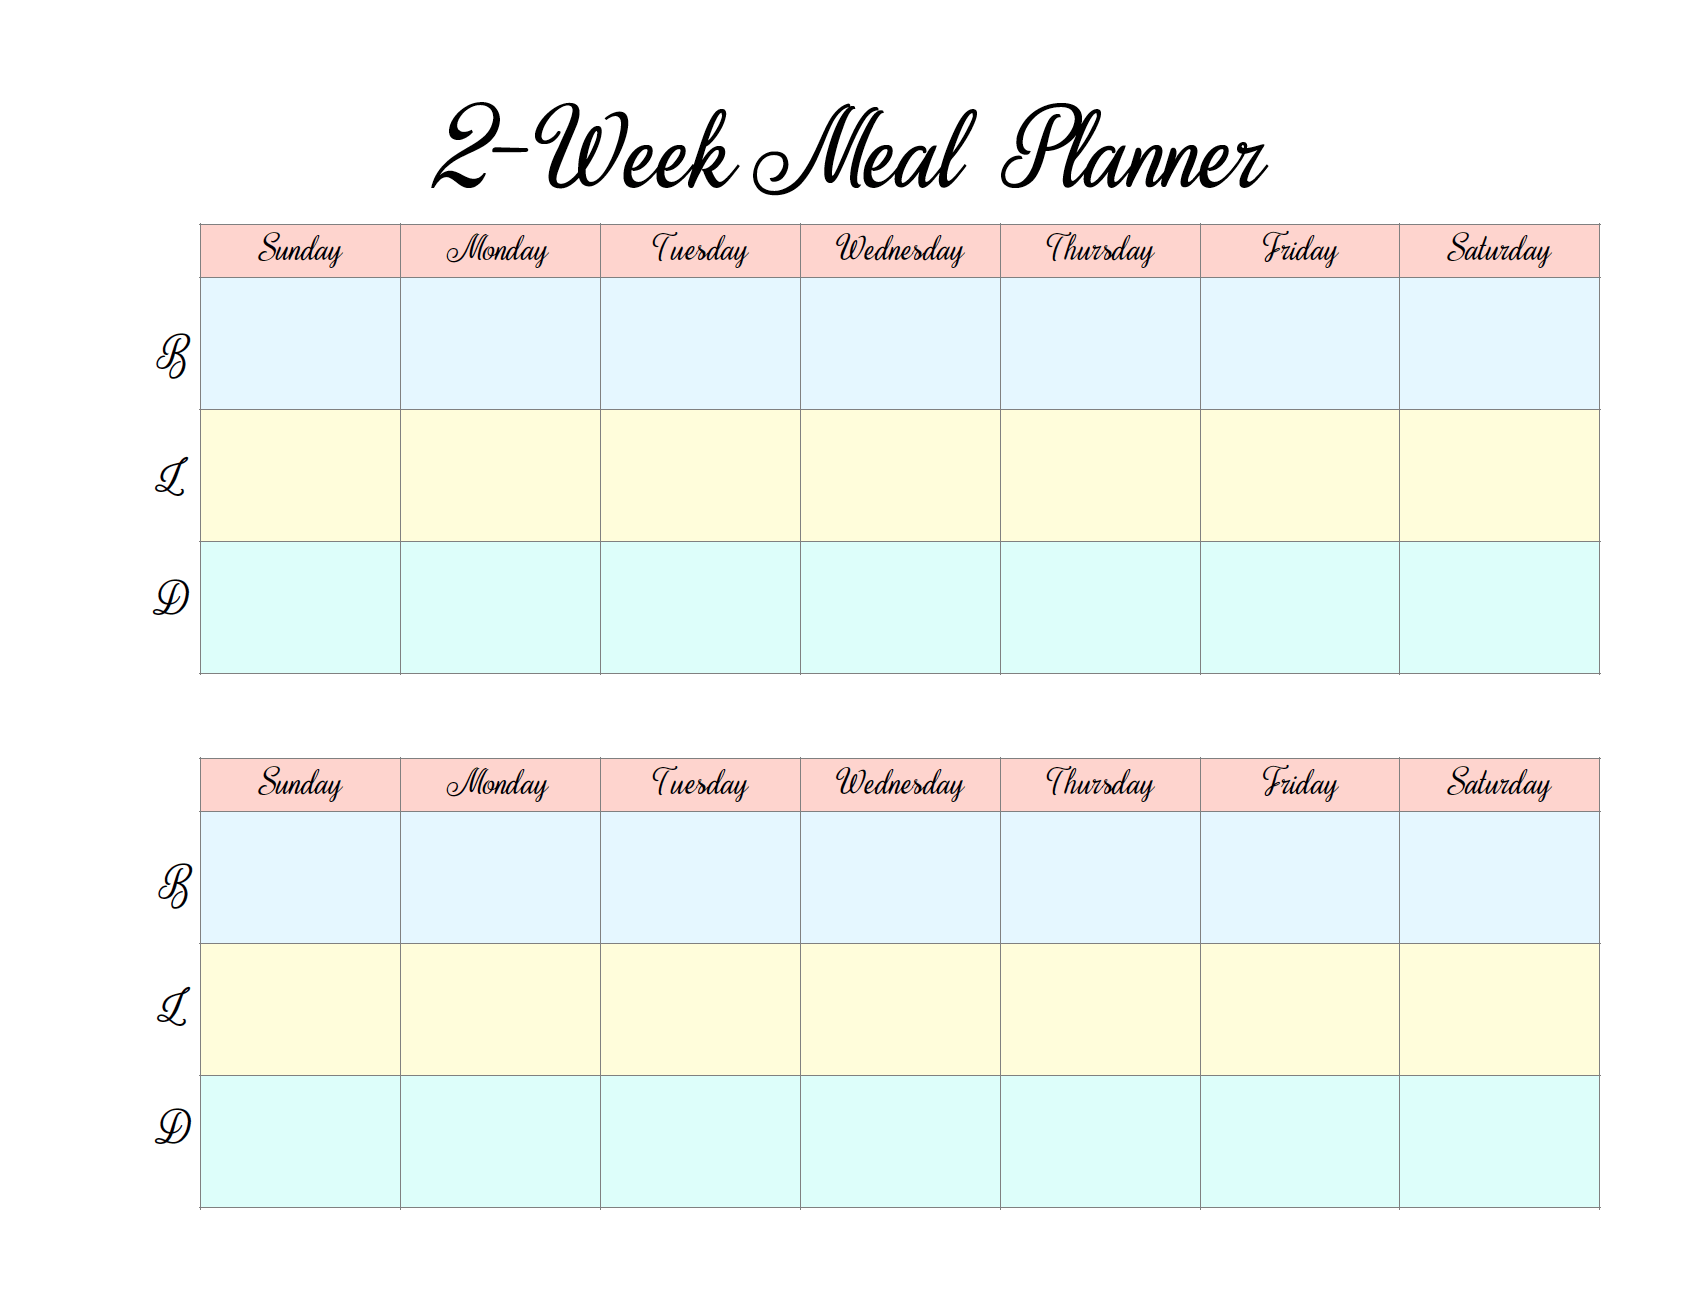 calendar for the next 2 weeks 26